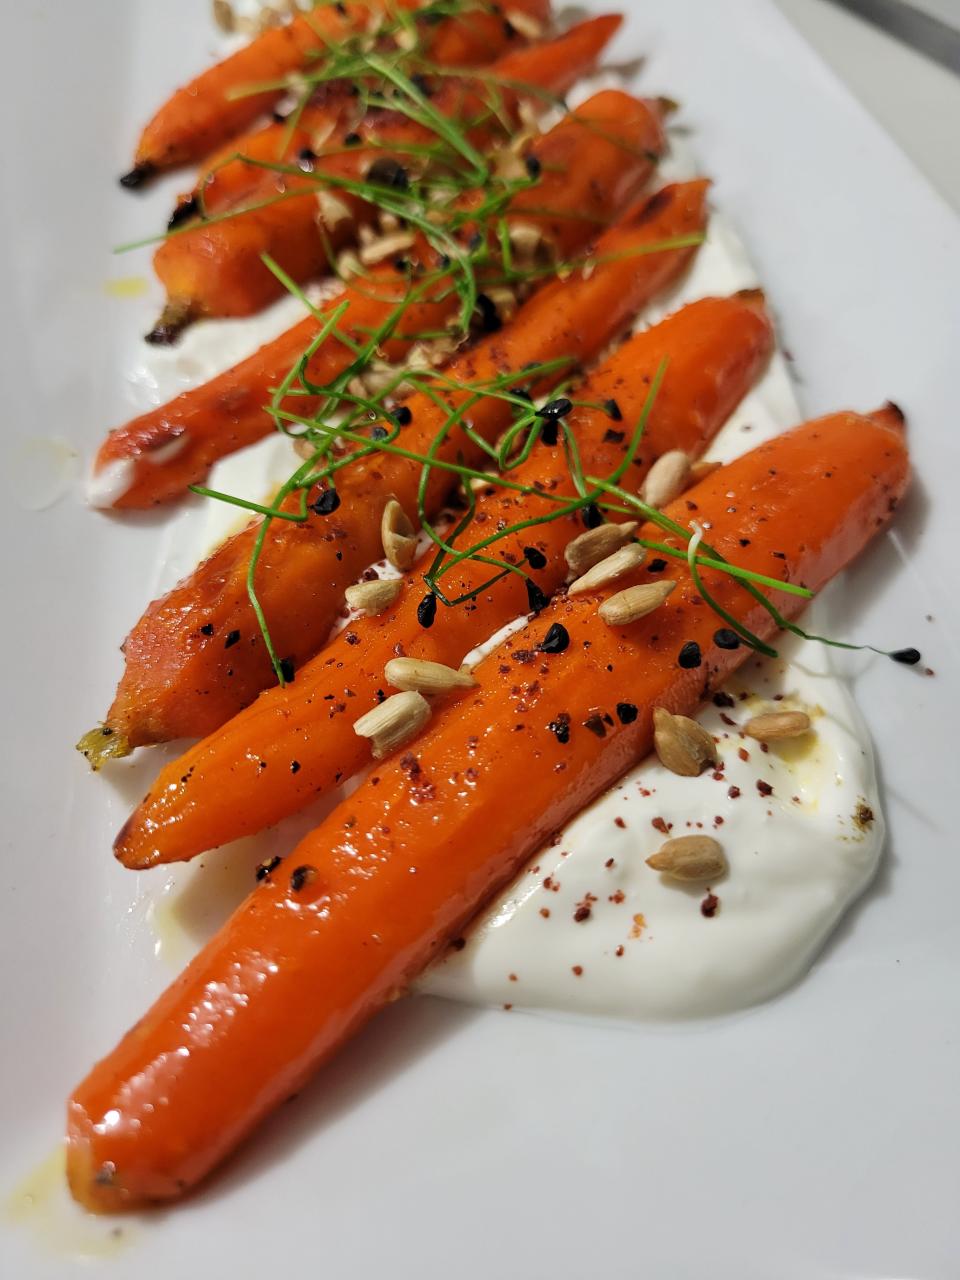 Honey roasted carrots with labne, za'tar, sumac, sunflower seed and micro chive at The Raconteur in Pleasantville.